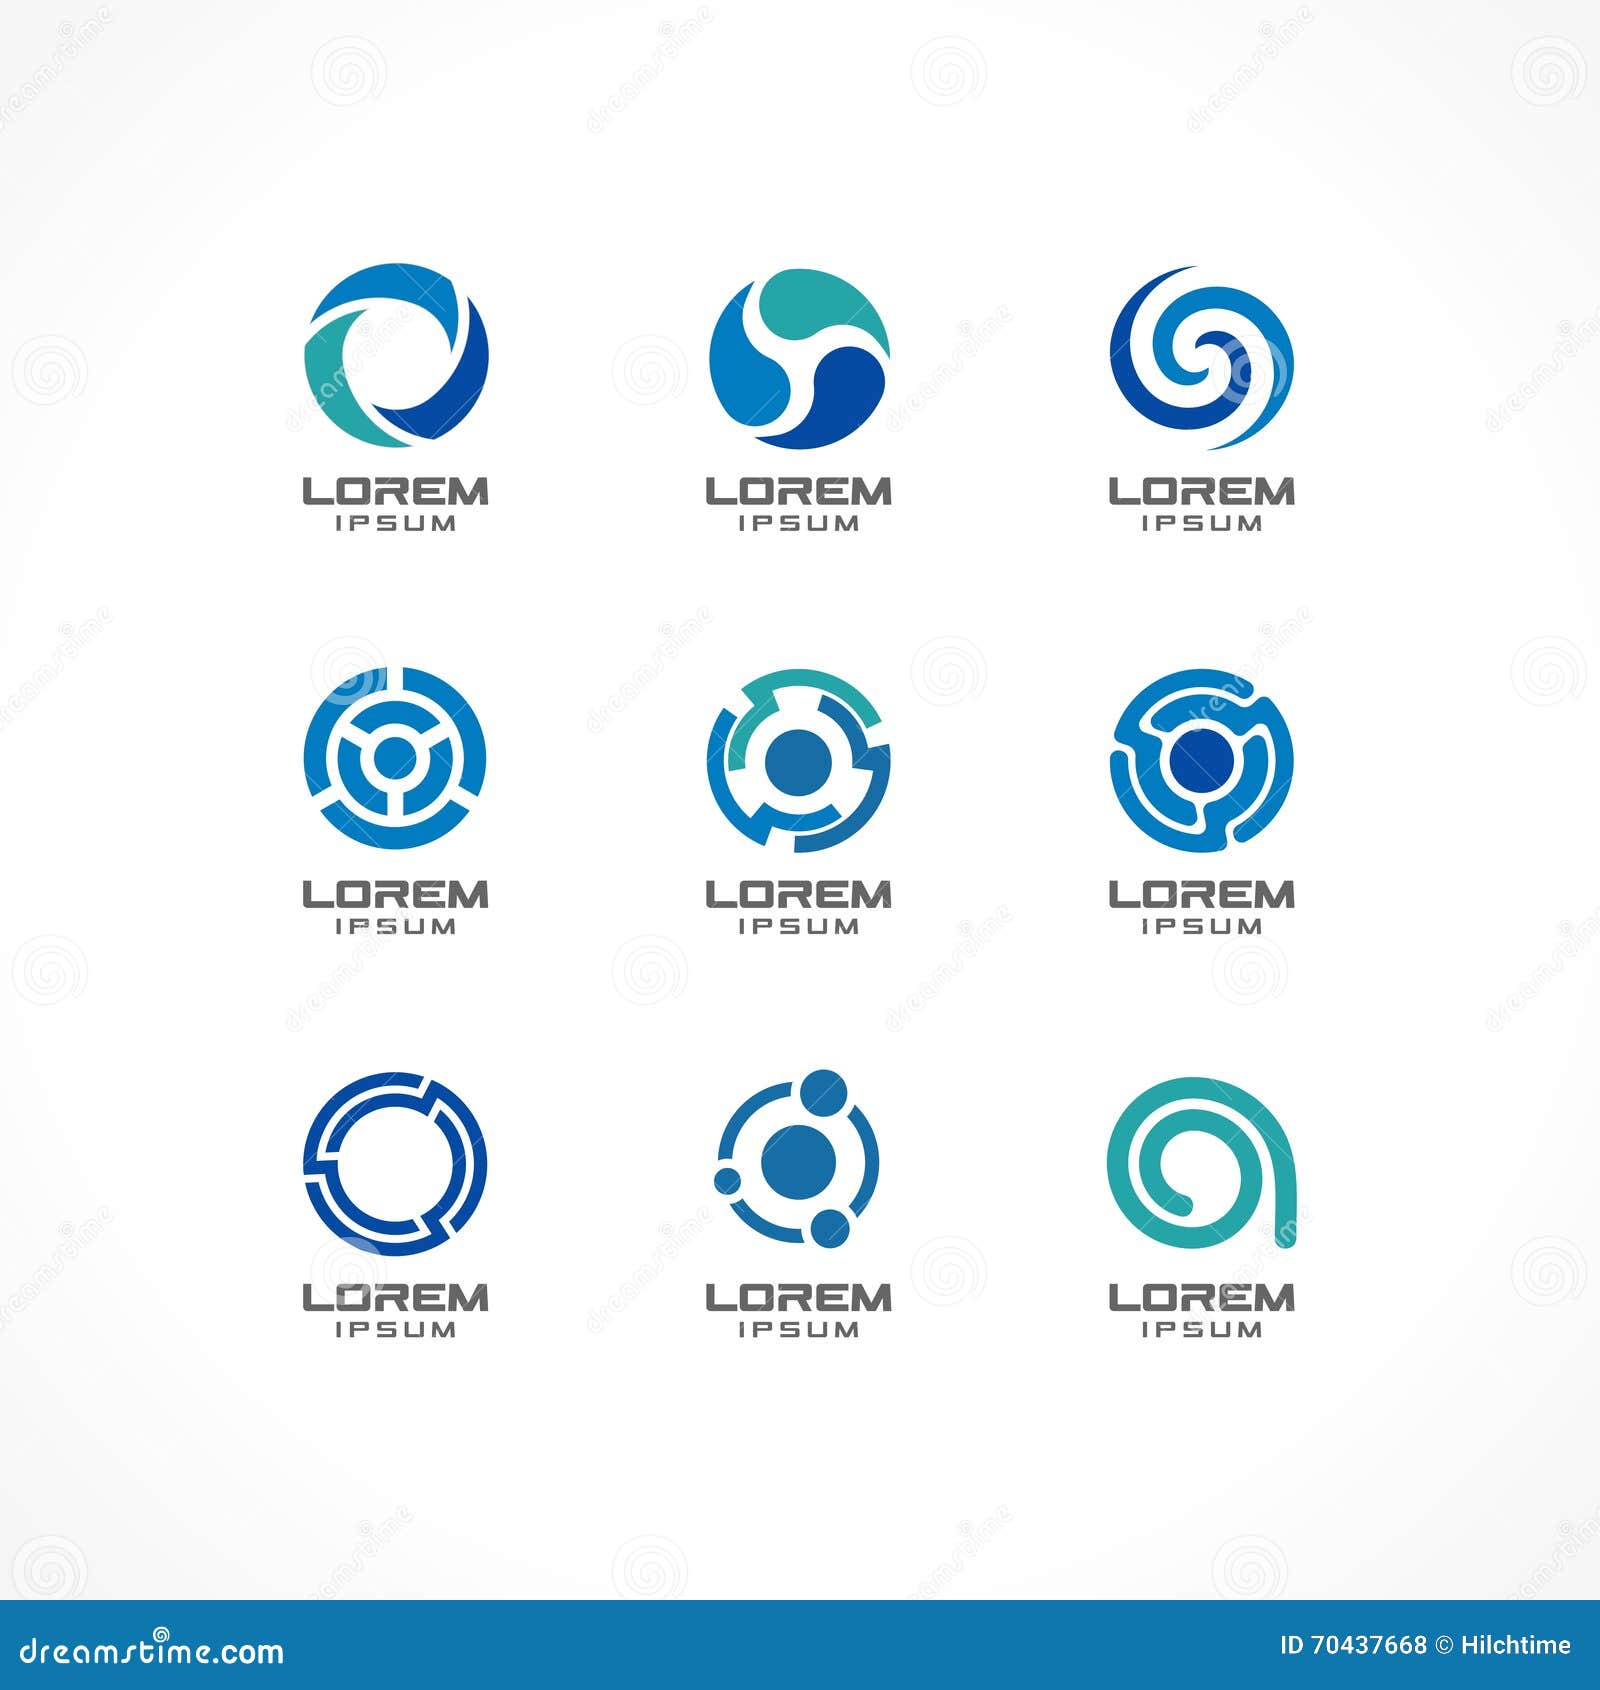 Set Of Icon Design Elements Abstract Logo Ideas For Business Company Concepts Stock Vector Illustration Of Globe Icon